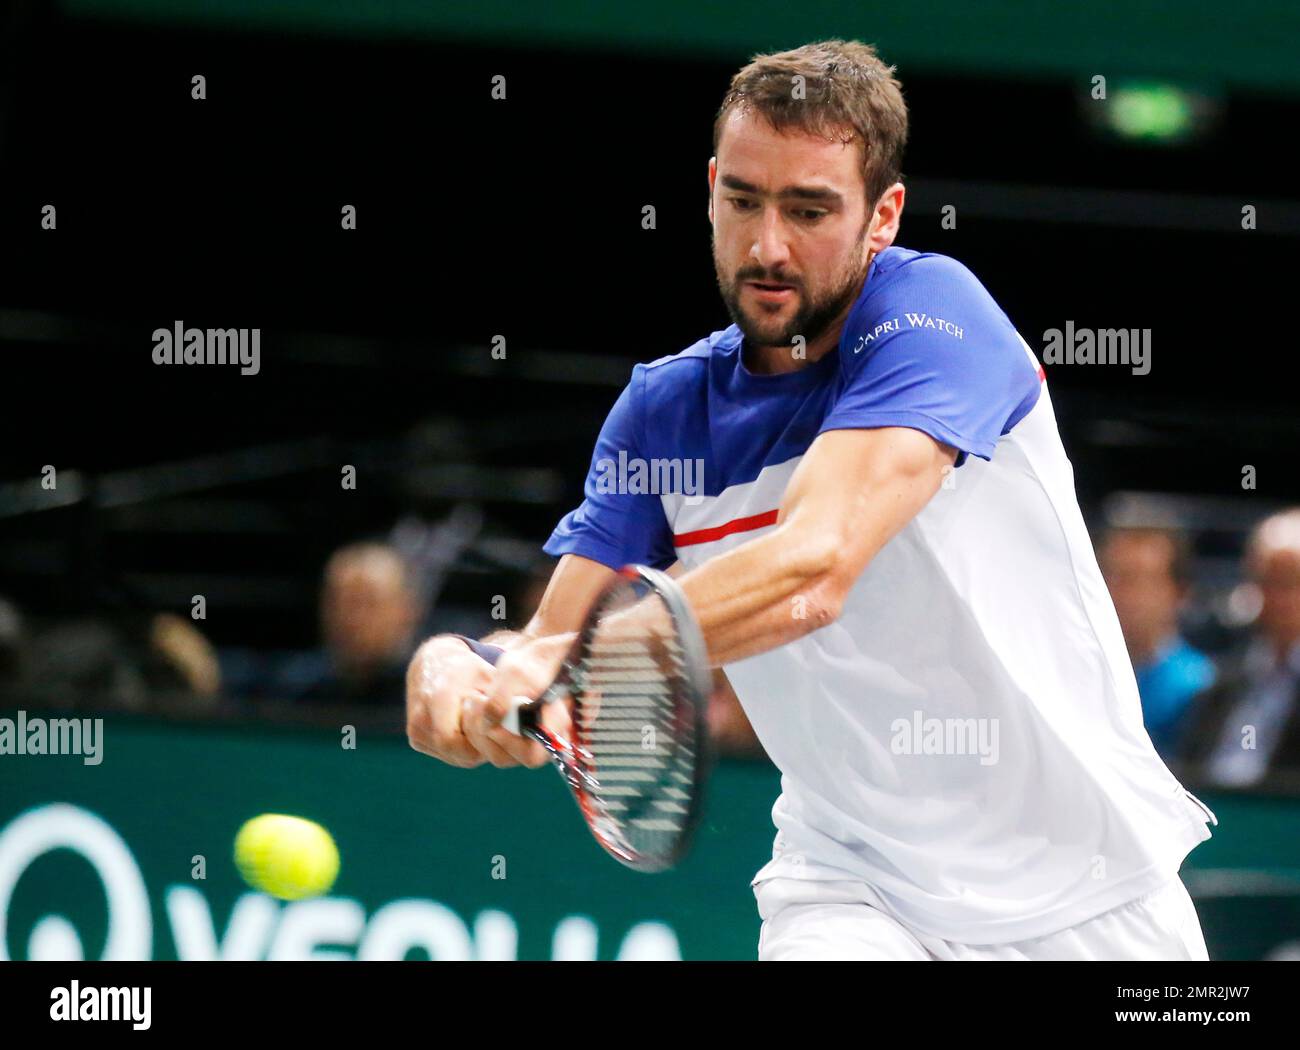 Marin Cilic of Croatia returns the ball to Julien Benneteau of France  during their quarterfinal match of the Paris Masters tennis tournament at  the Bercy Arena in Paris, France, Friday, Nov. 3,